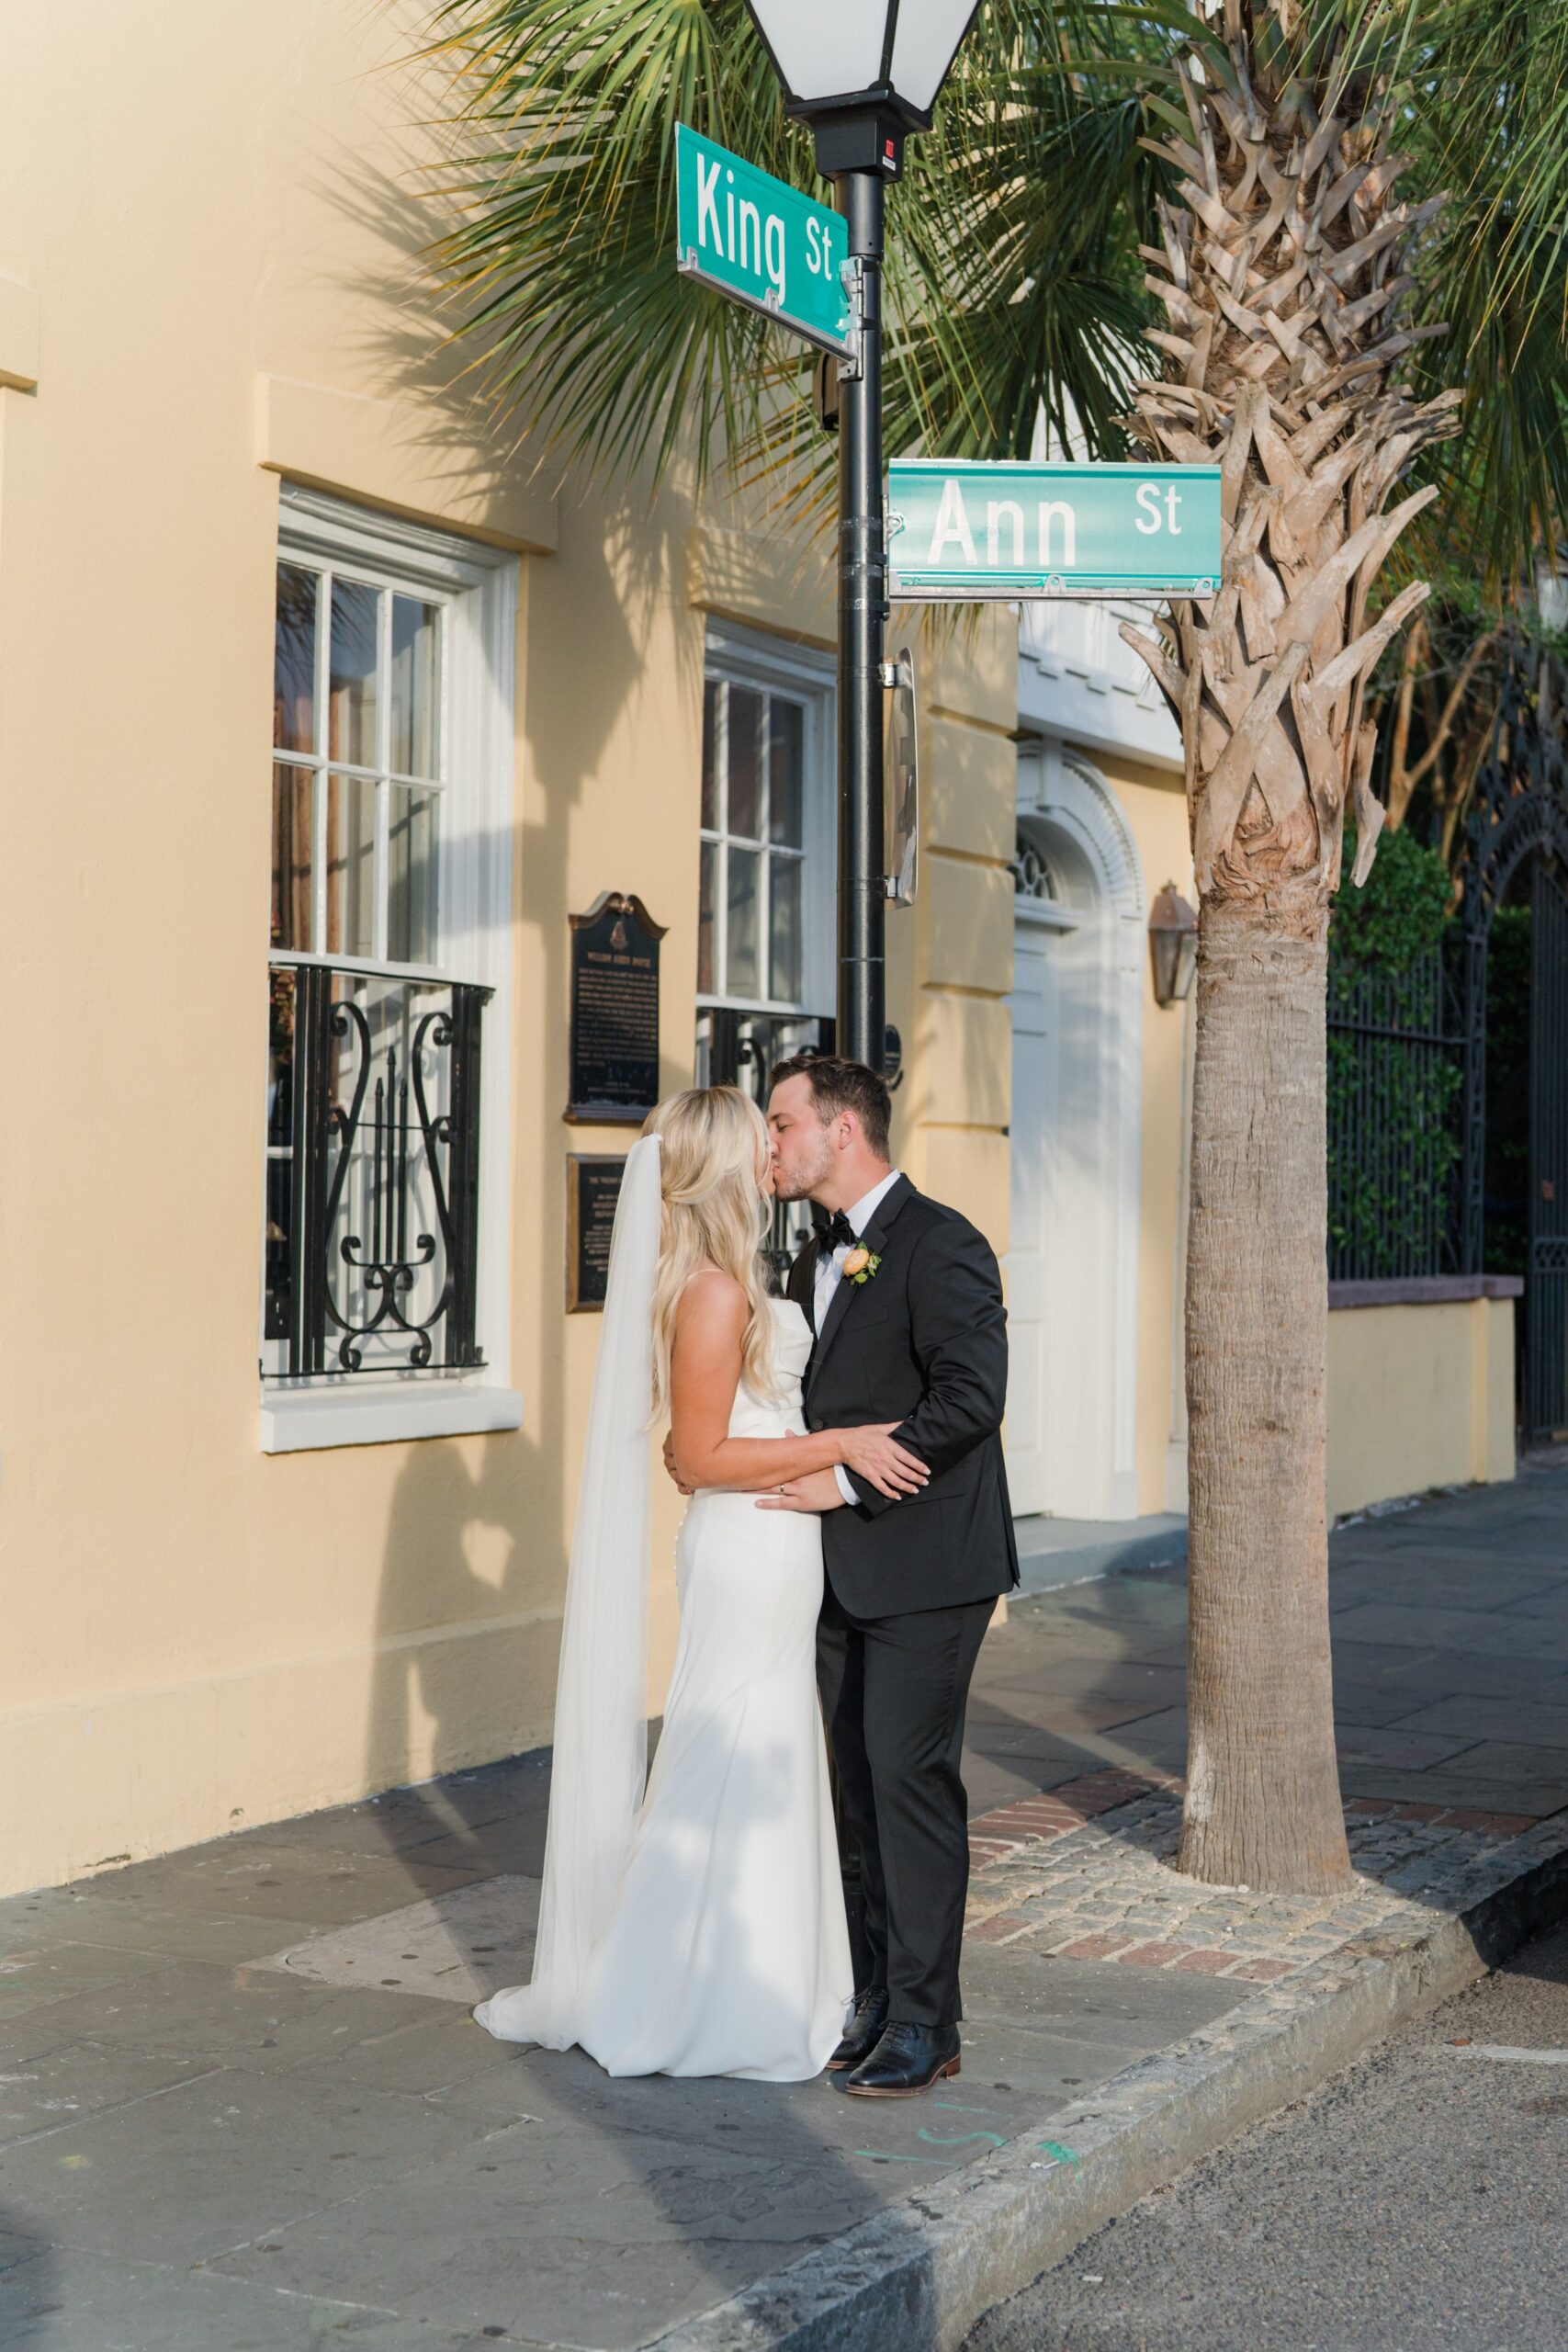 full sun bride and groom wedding portrait on the sidewalk with william aiken house and palm tree.